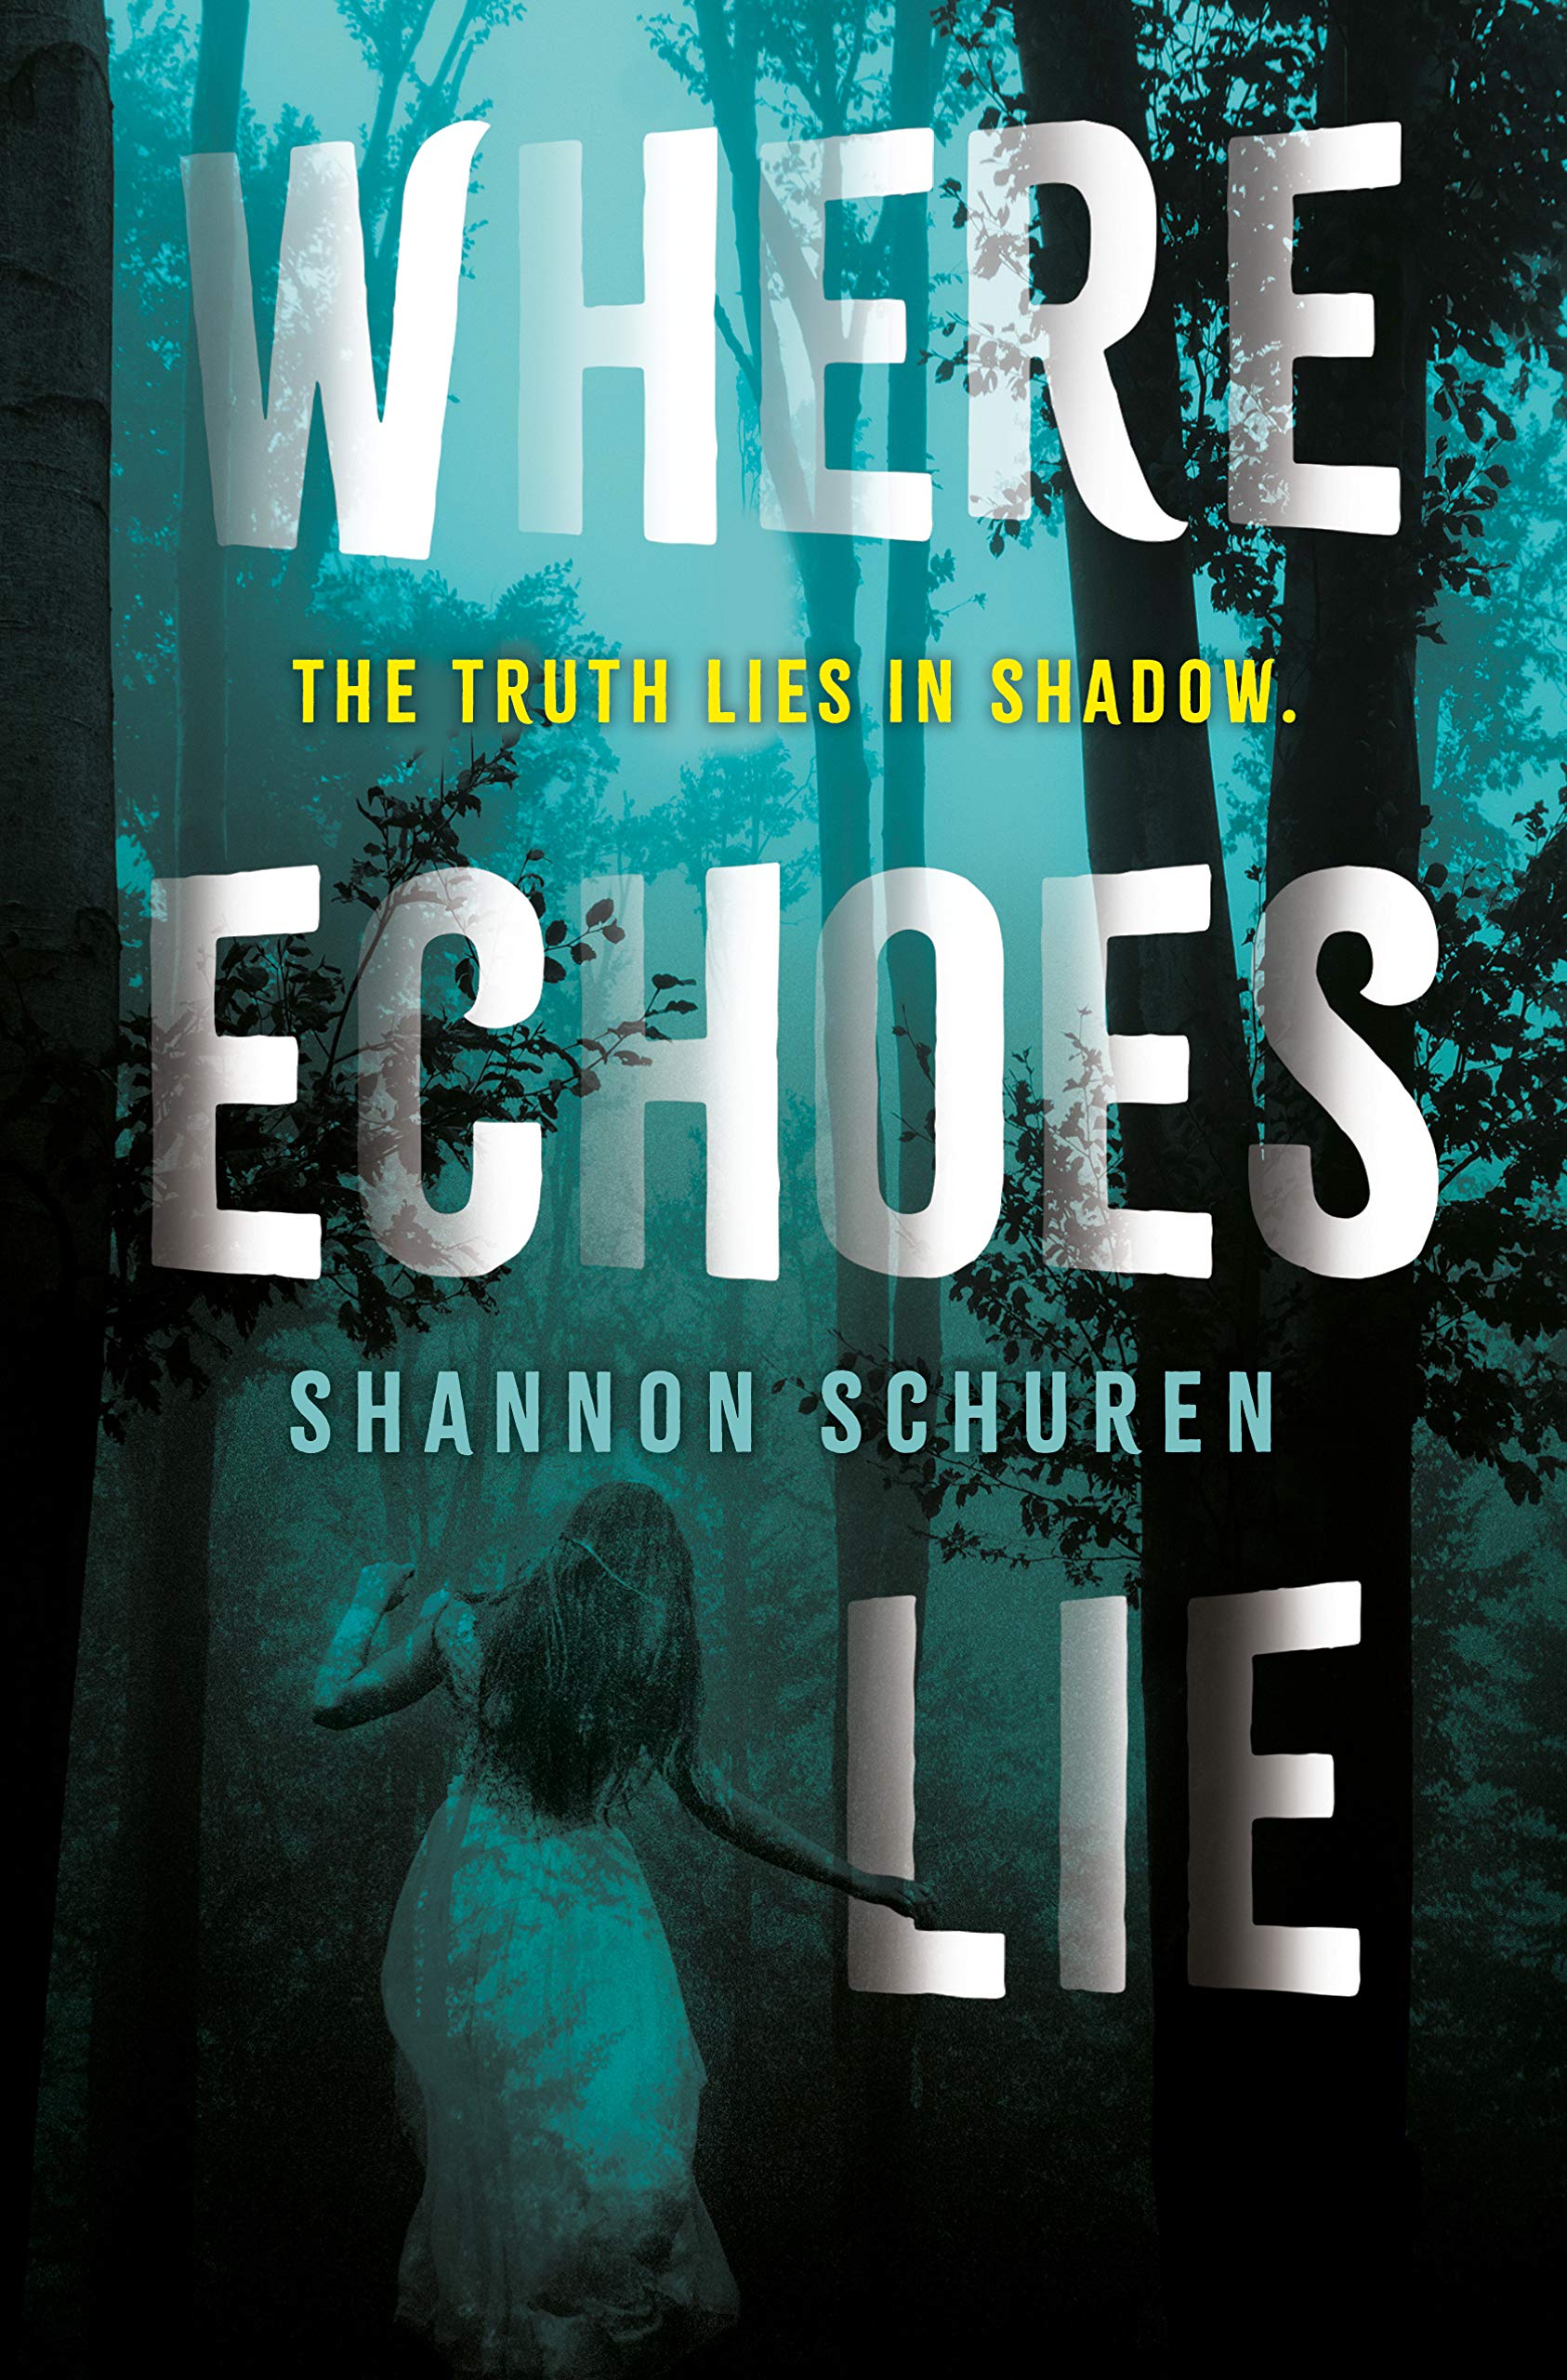 Cover of “Where Echoes Lie” by Shannon Schuren